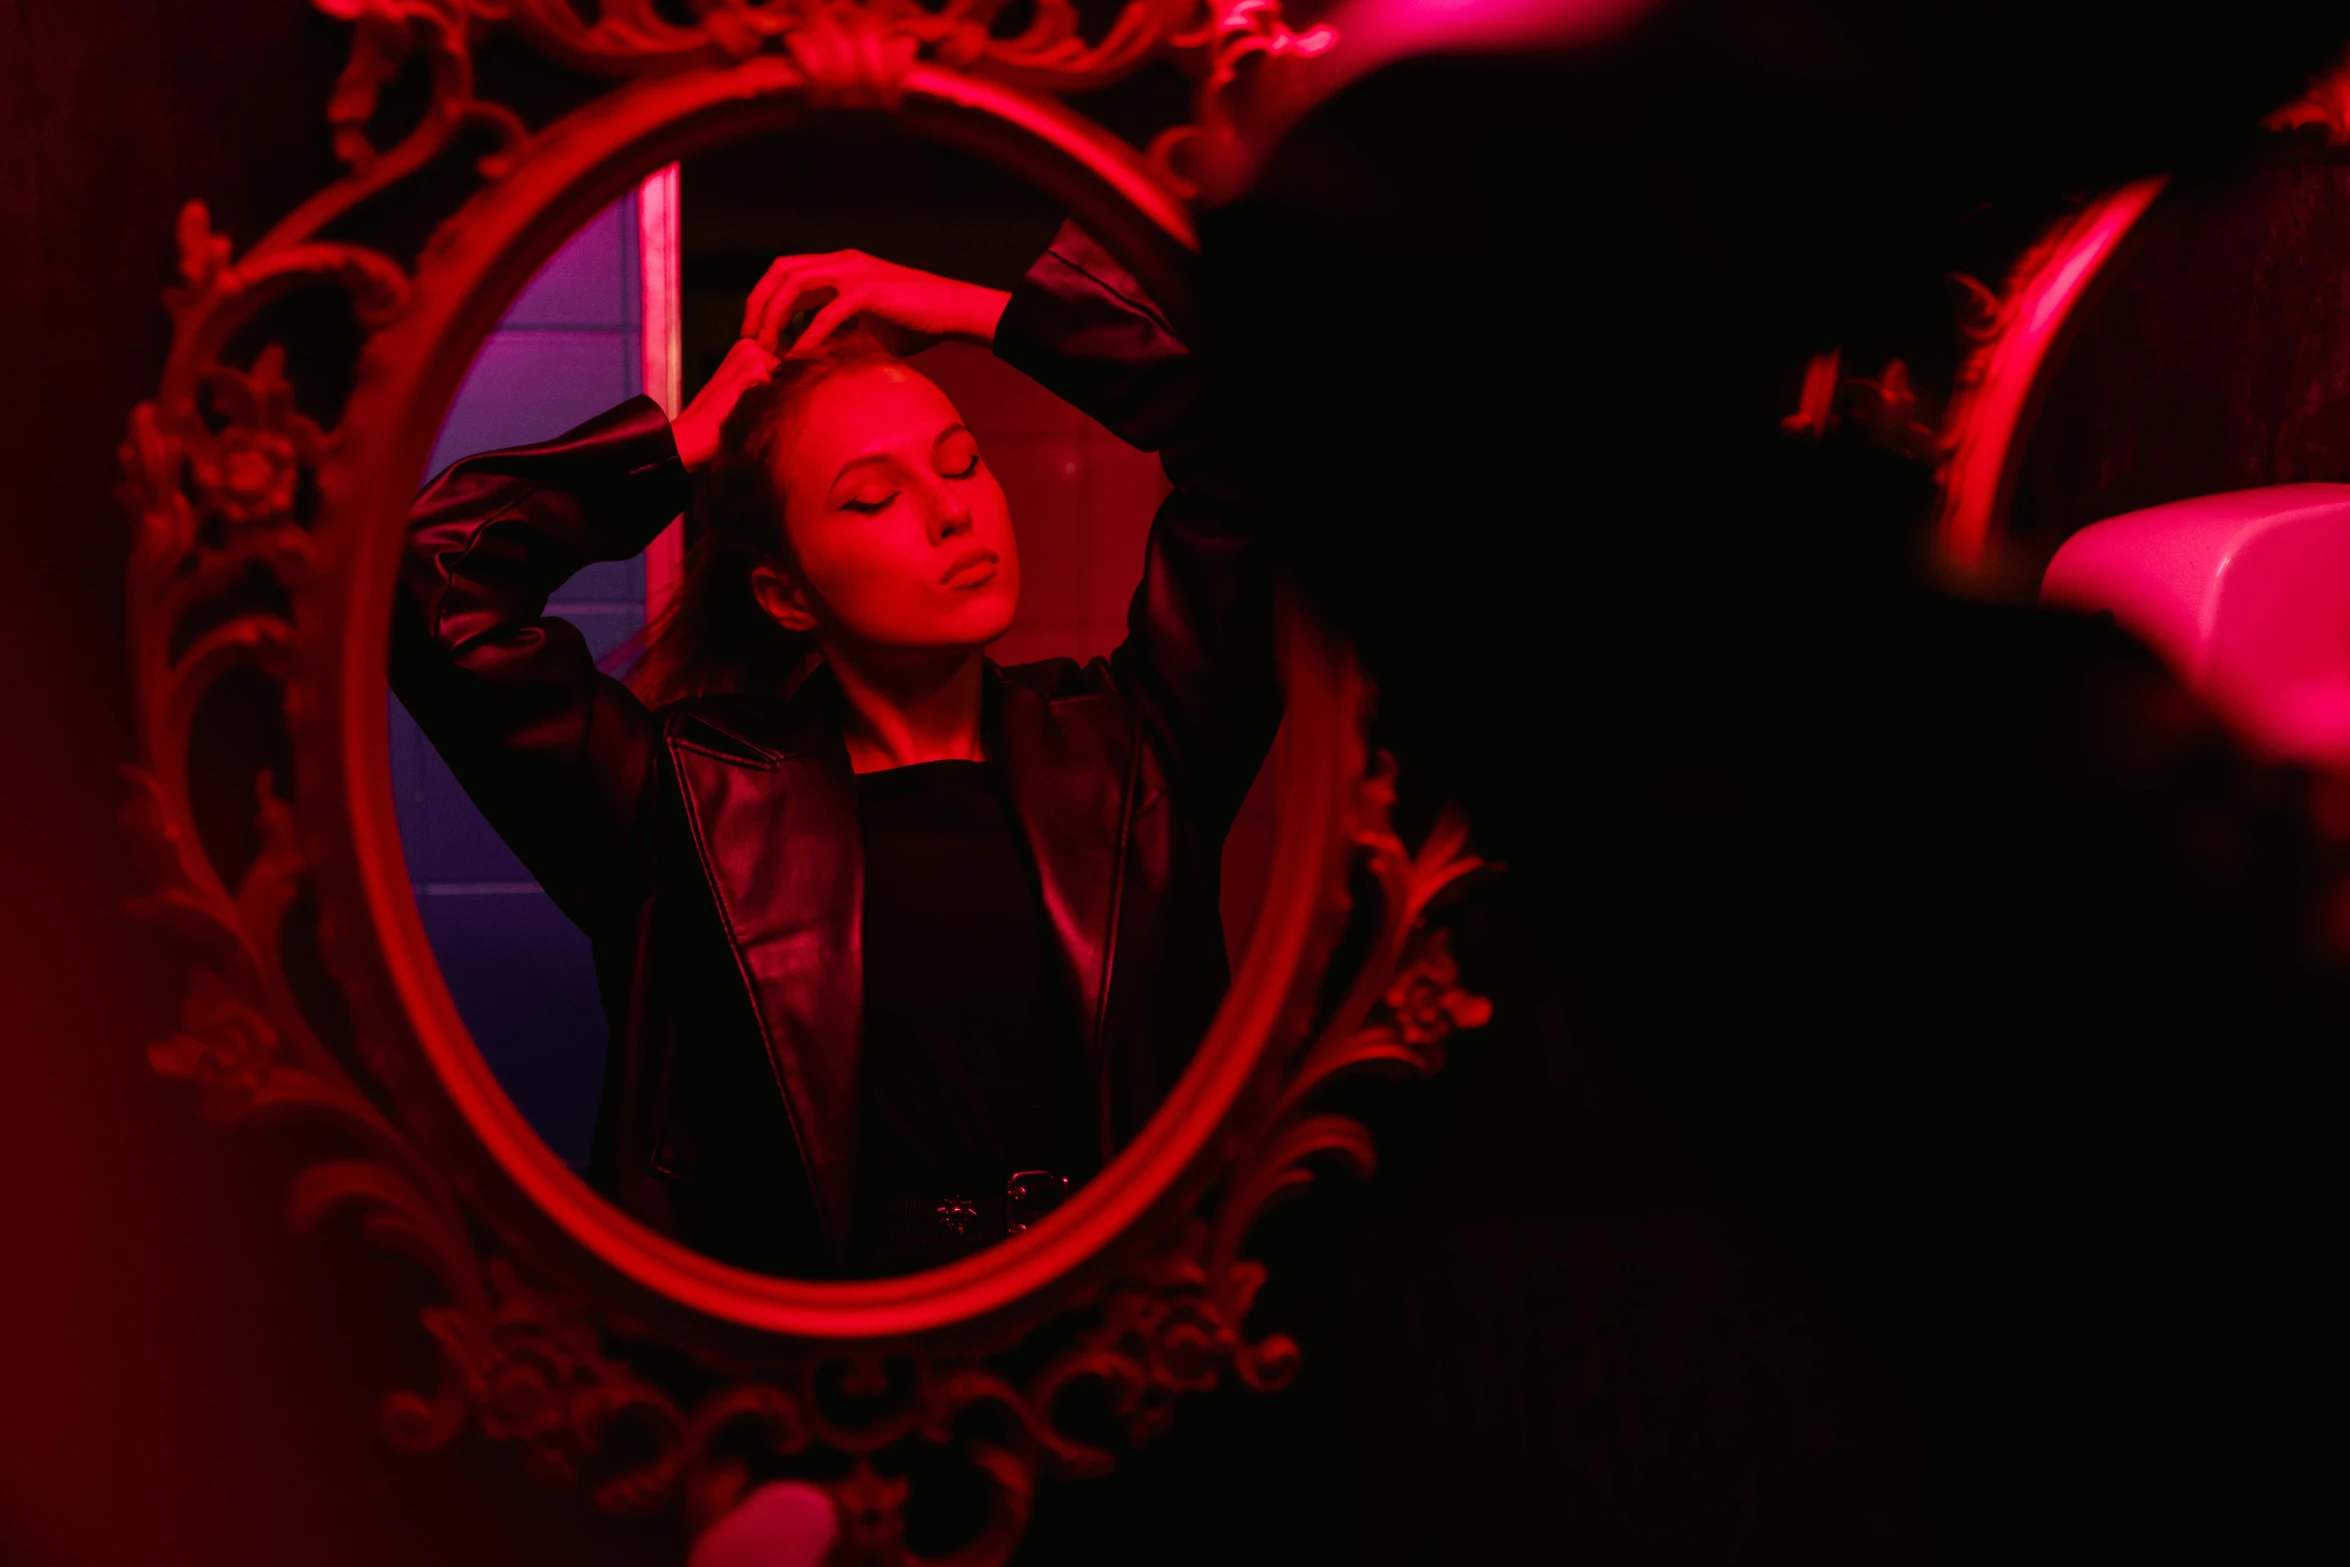 a woman combing her hair in front of a mirror, an album cover, inspired by Elsa Bleda, pexels contest winner, red and obsidian neon, portrait sophie mudd, red leather jacket, sydney sweeney